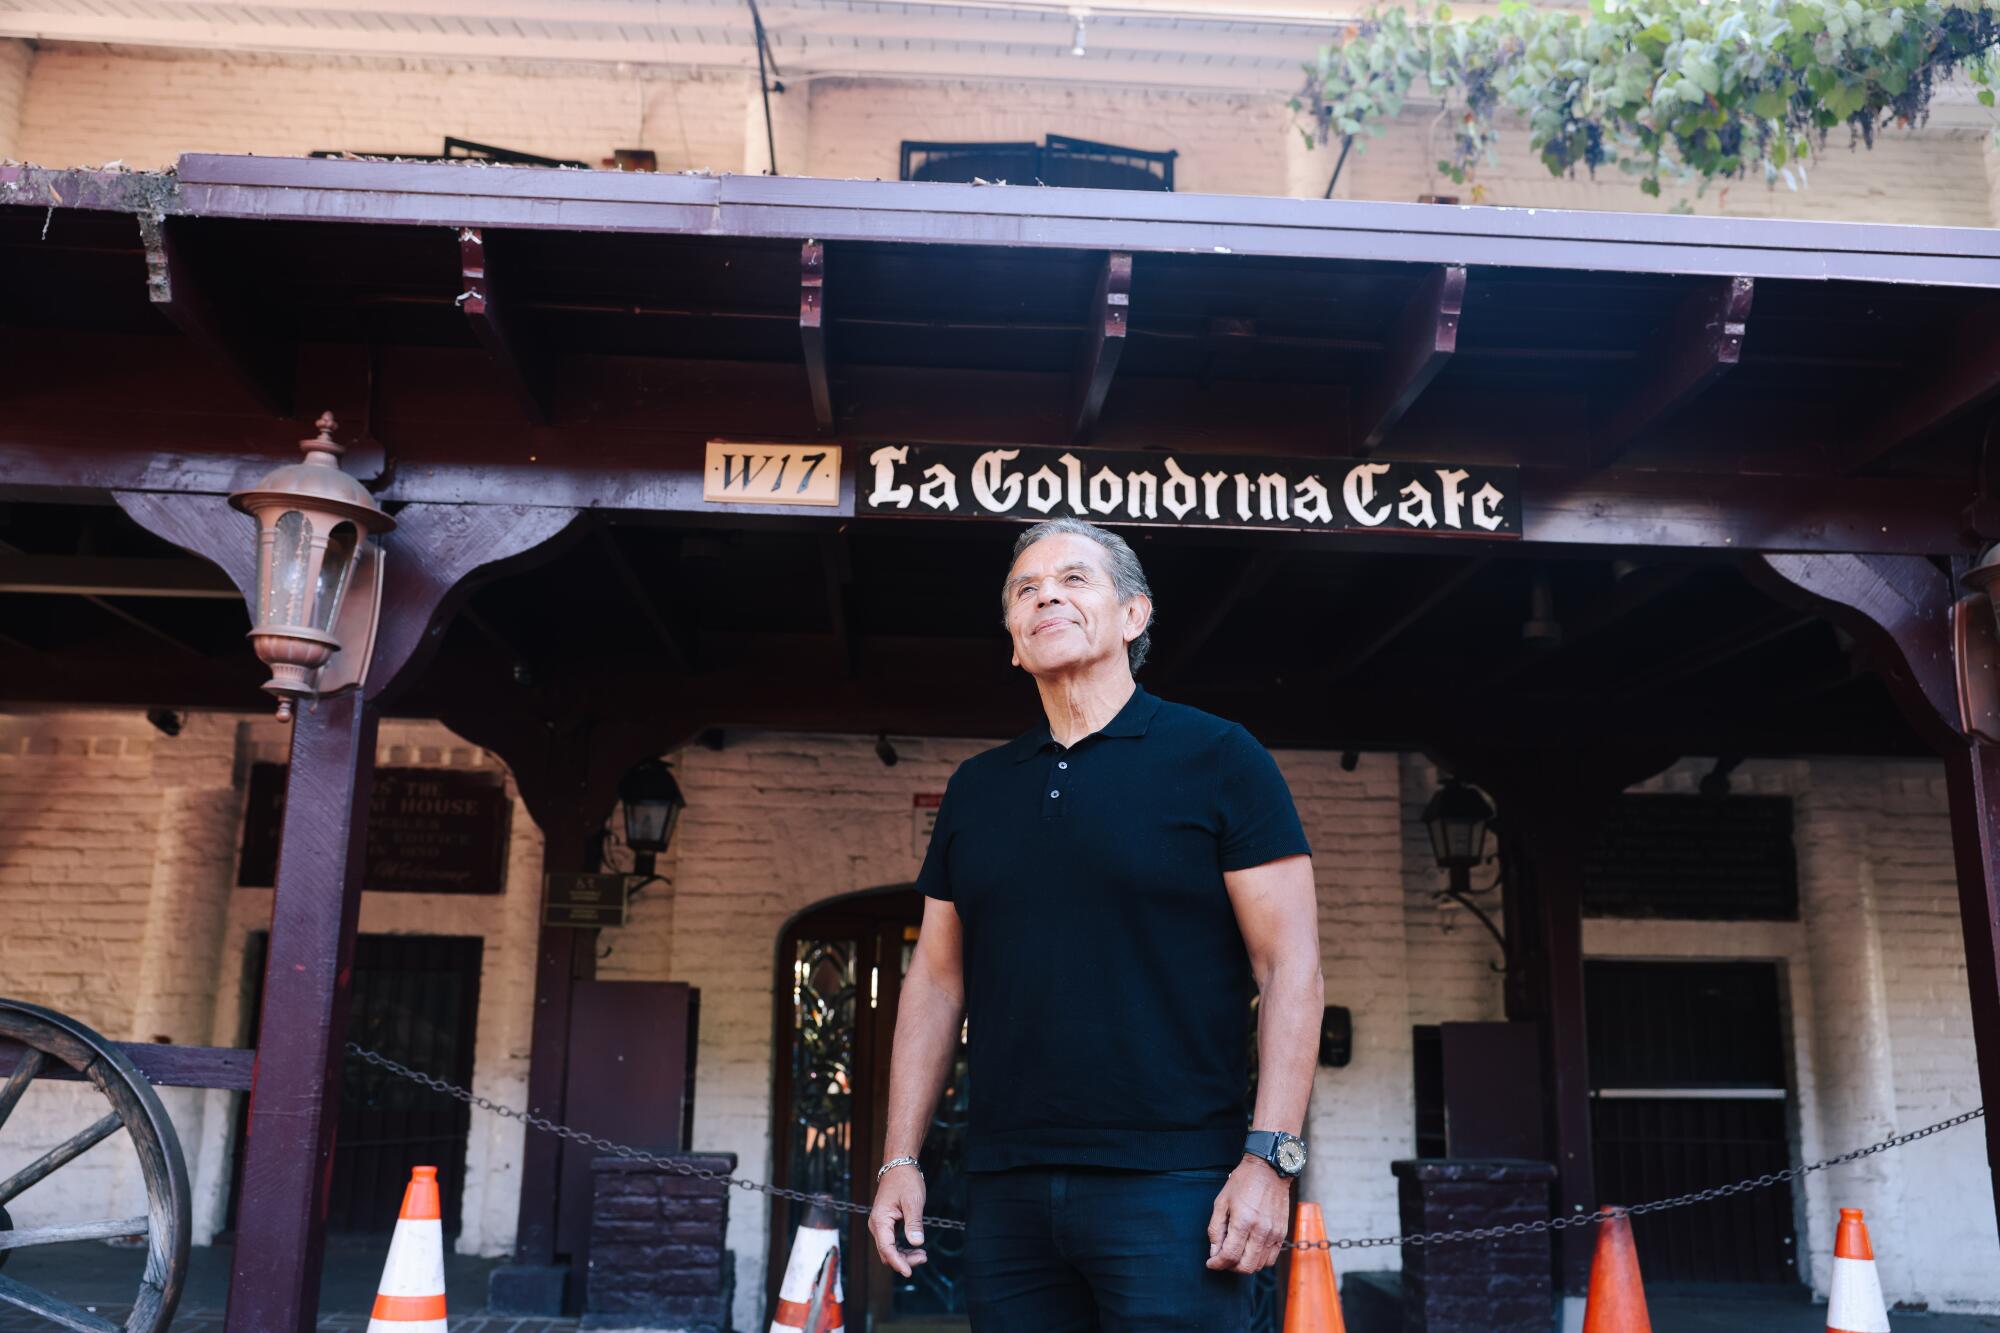 A man stands under a sign that says "La Golondrina Cafe."